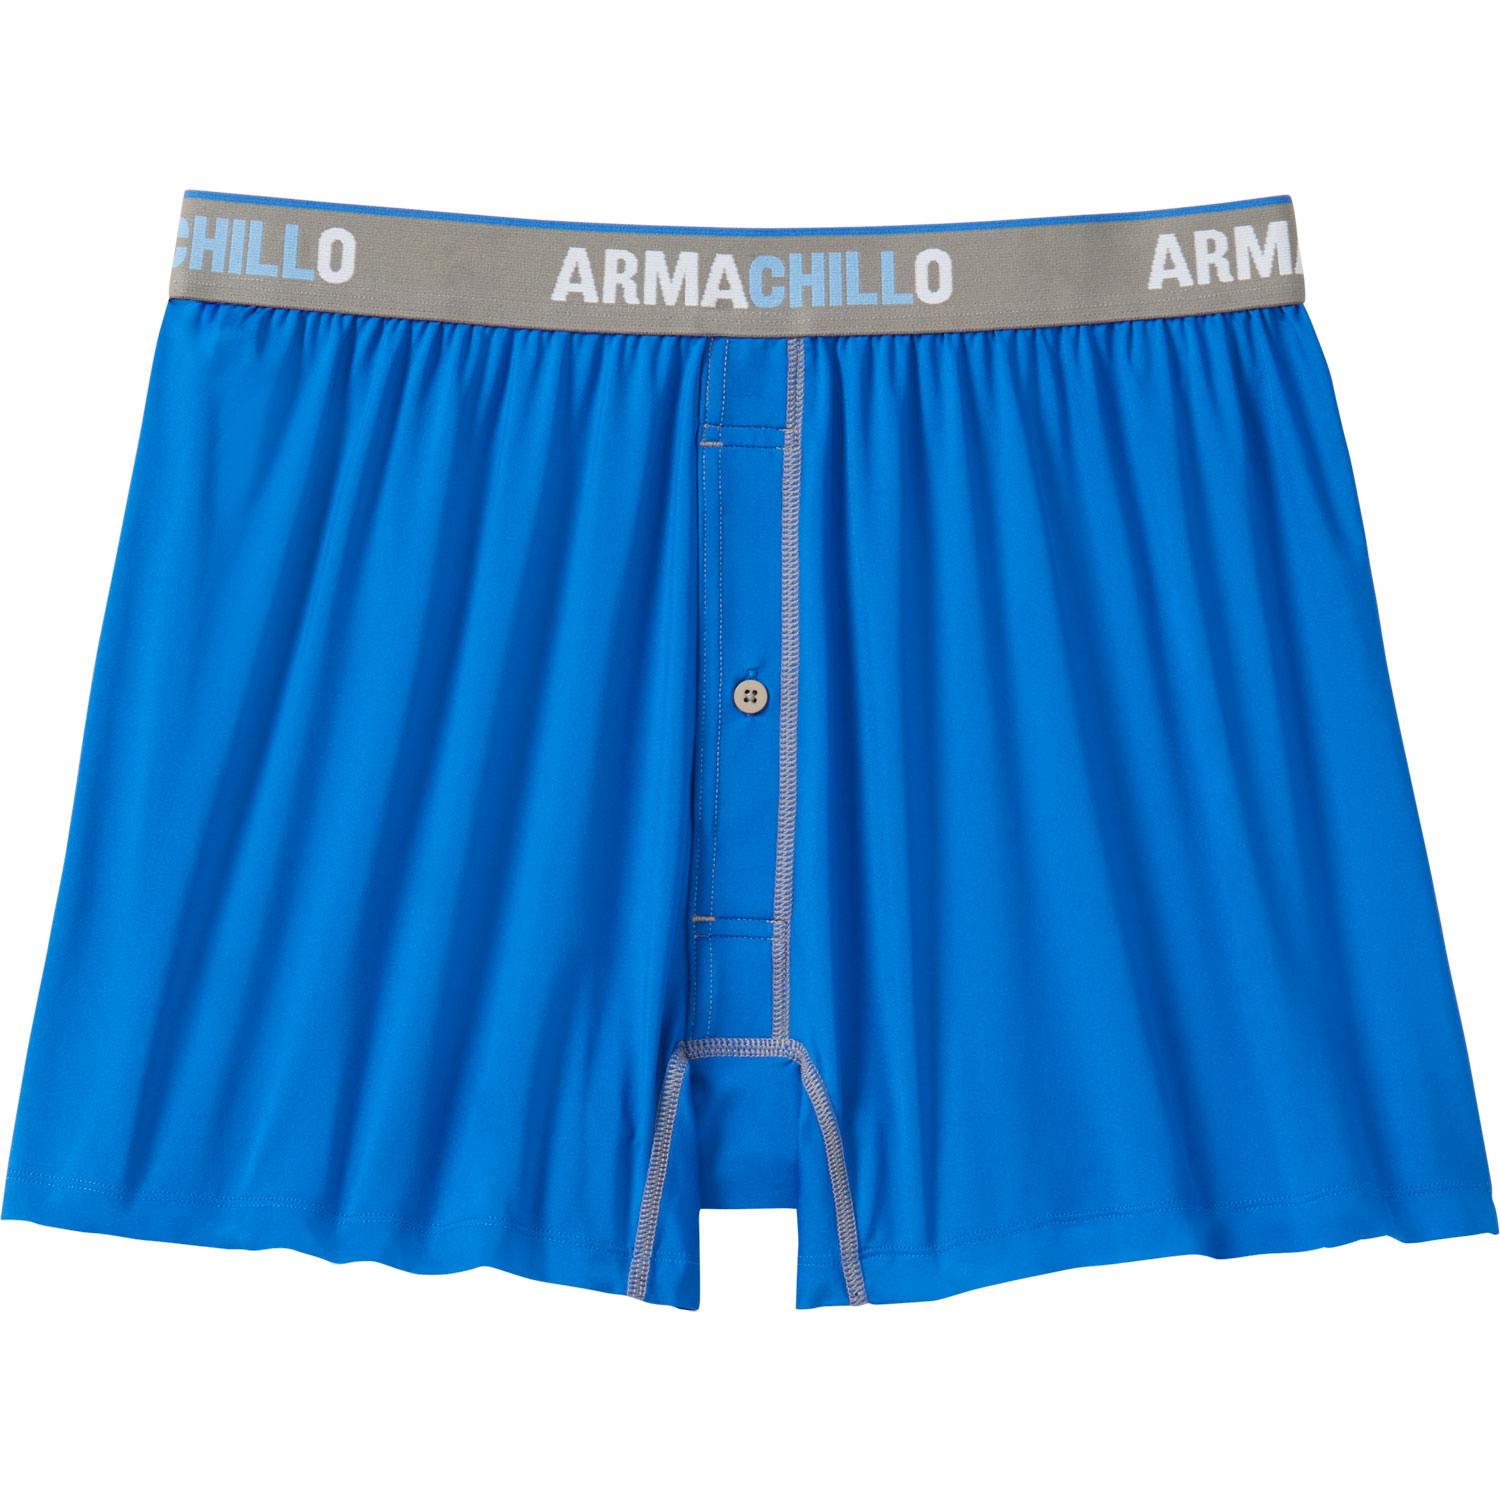 1 Duluth Trading Company Mens Armachillo Cooling Boxer Briefs Lagoon 83735